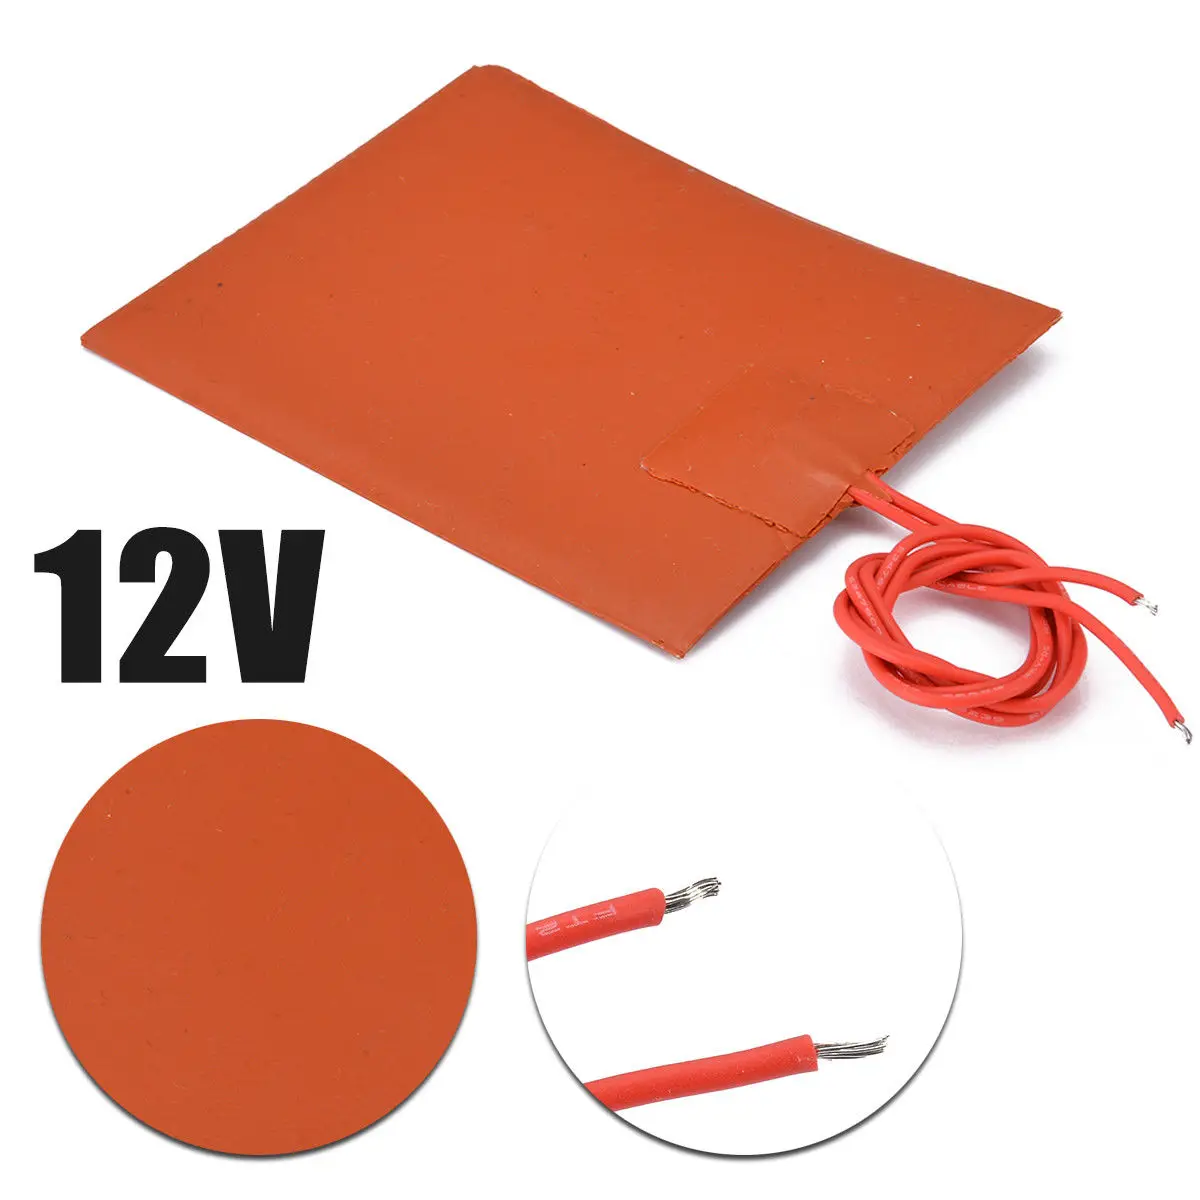 200W 12V DC 100*80mm Silicone Heater Pad Heating Mat Universal Fuel Tank Water Hot Bed For 3D Printer Warming Accessories |